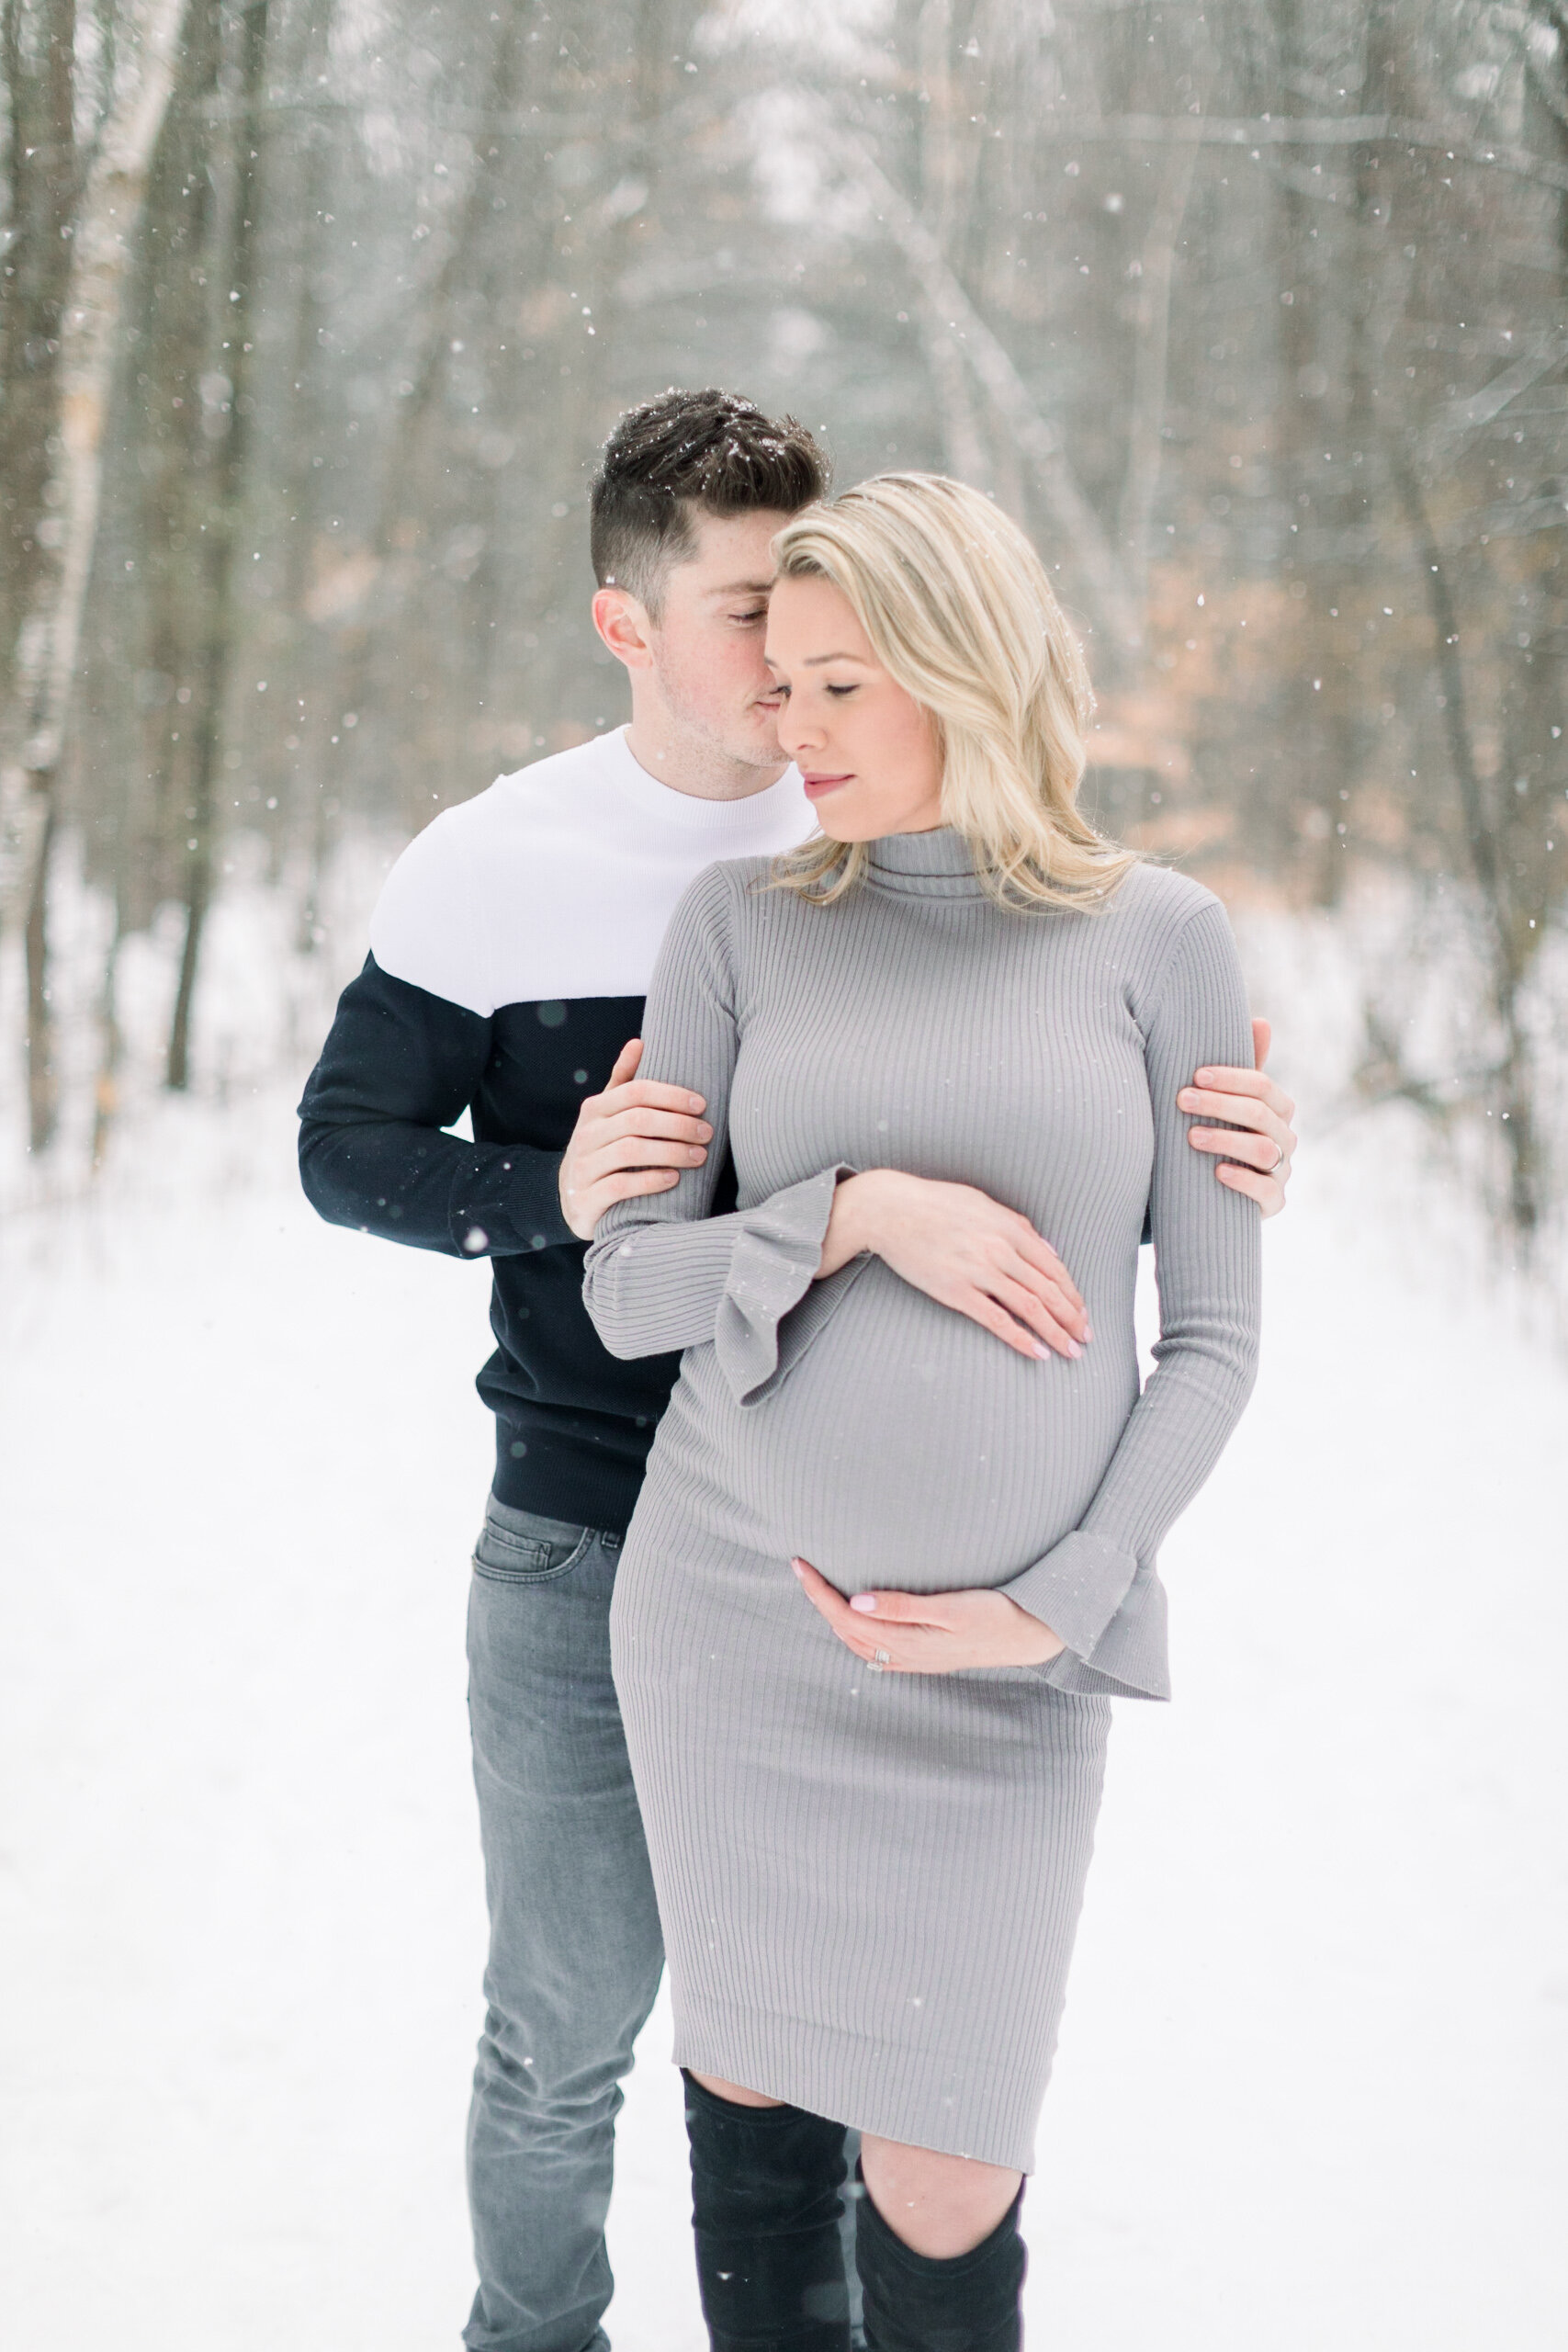  A husband and wife share a sweet moment as she cradles her belly in a beautiful Ottawa winter maternity session by Chelsea Mason Photography. Winter goals maternity session goals ideas and inspiration couple goals couple pose inspiration ideas and g